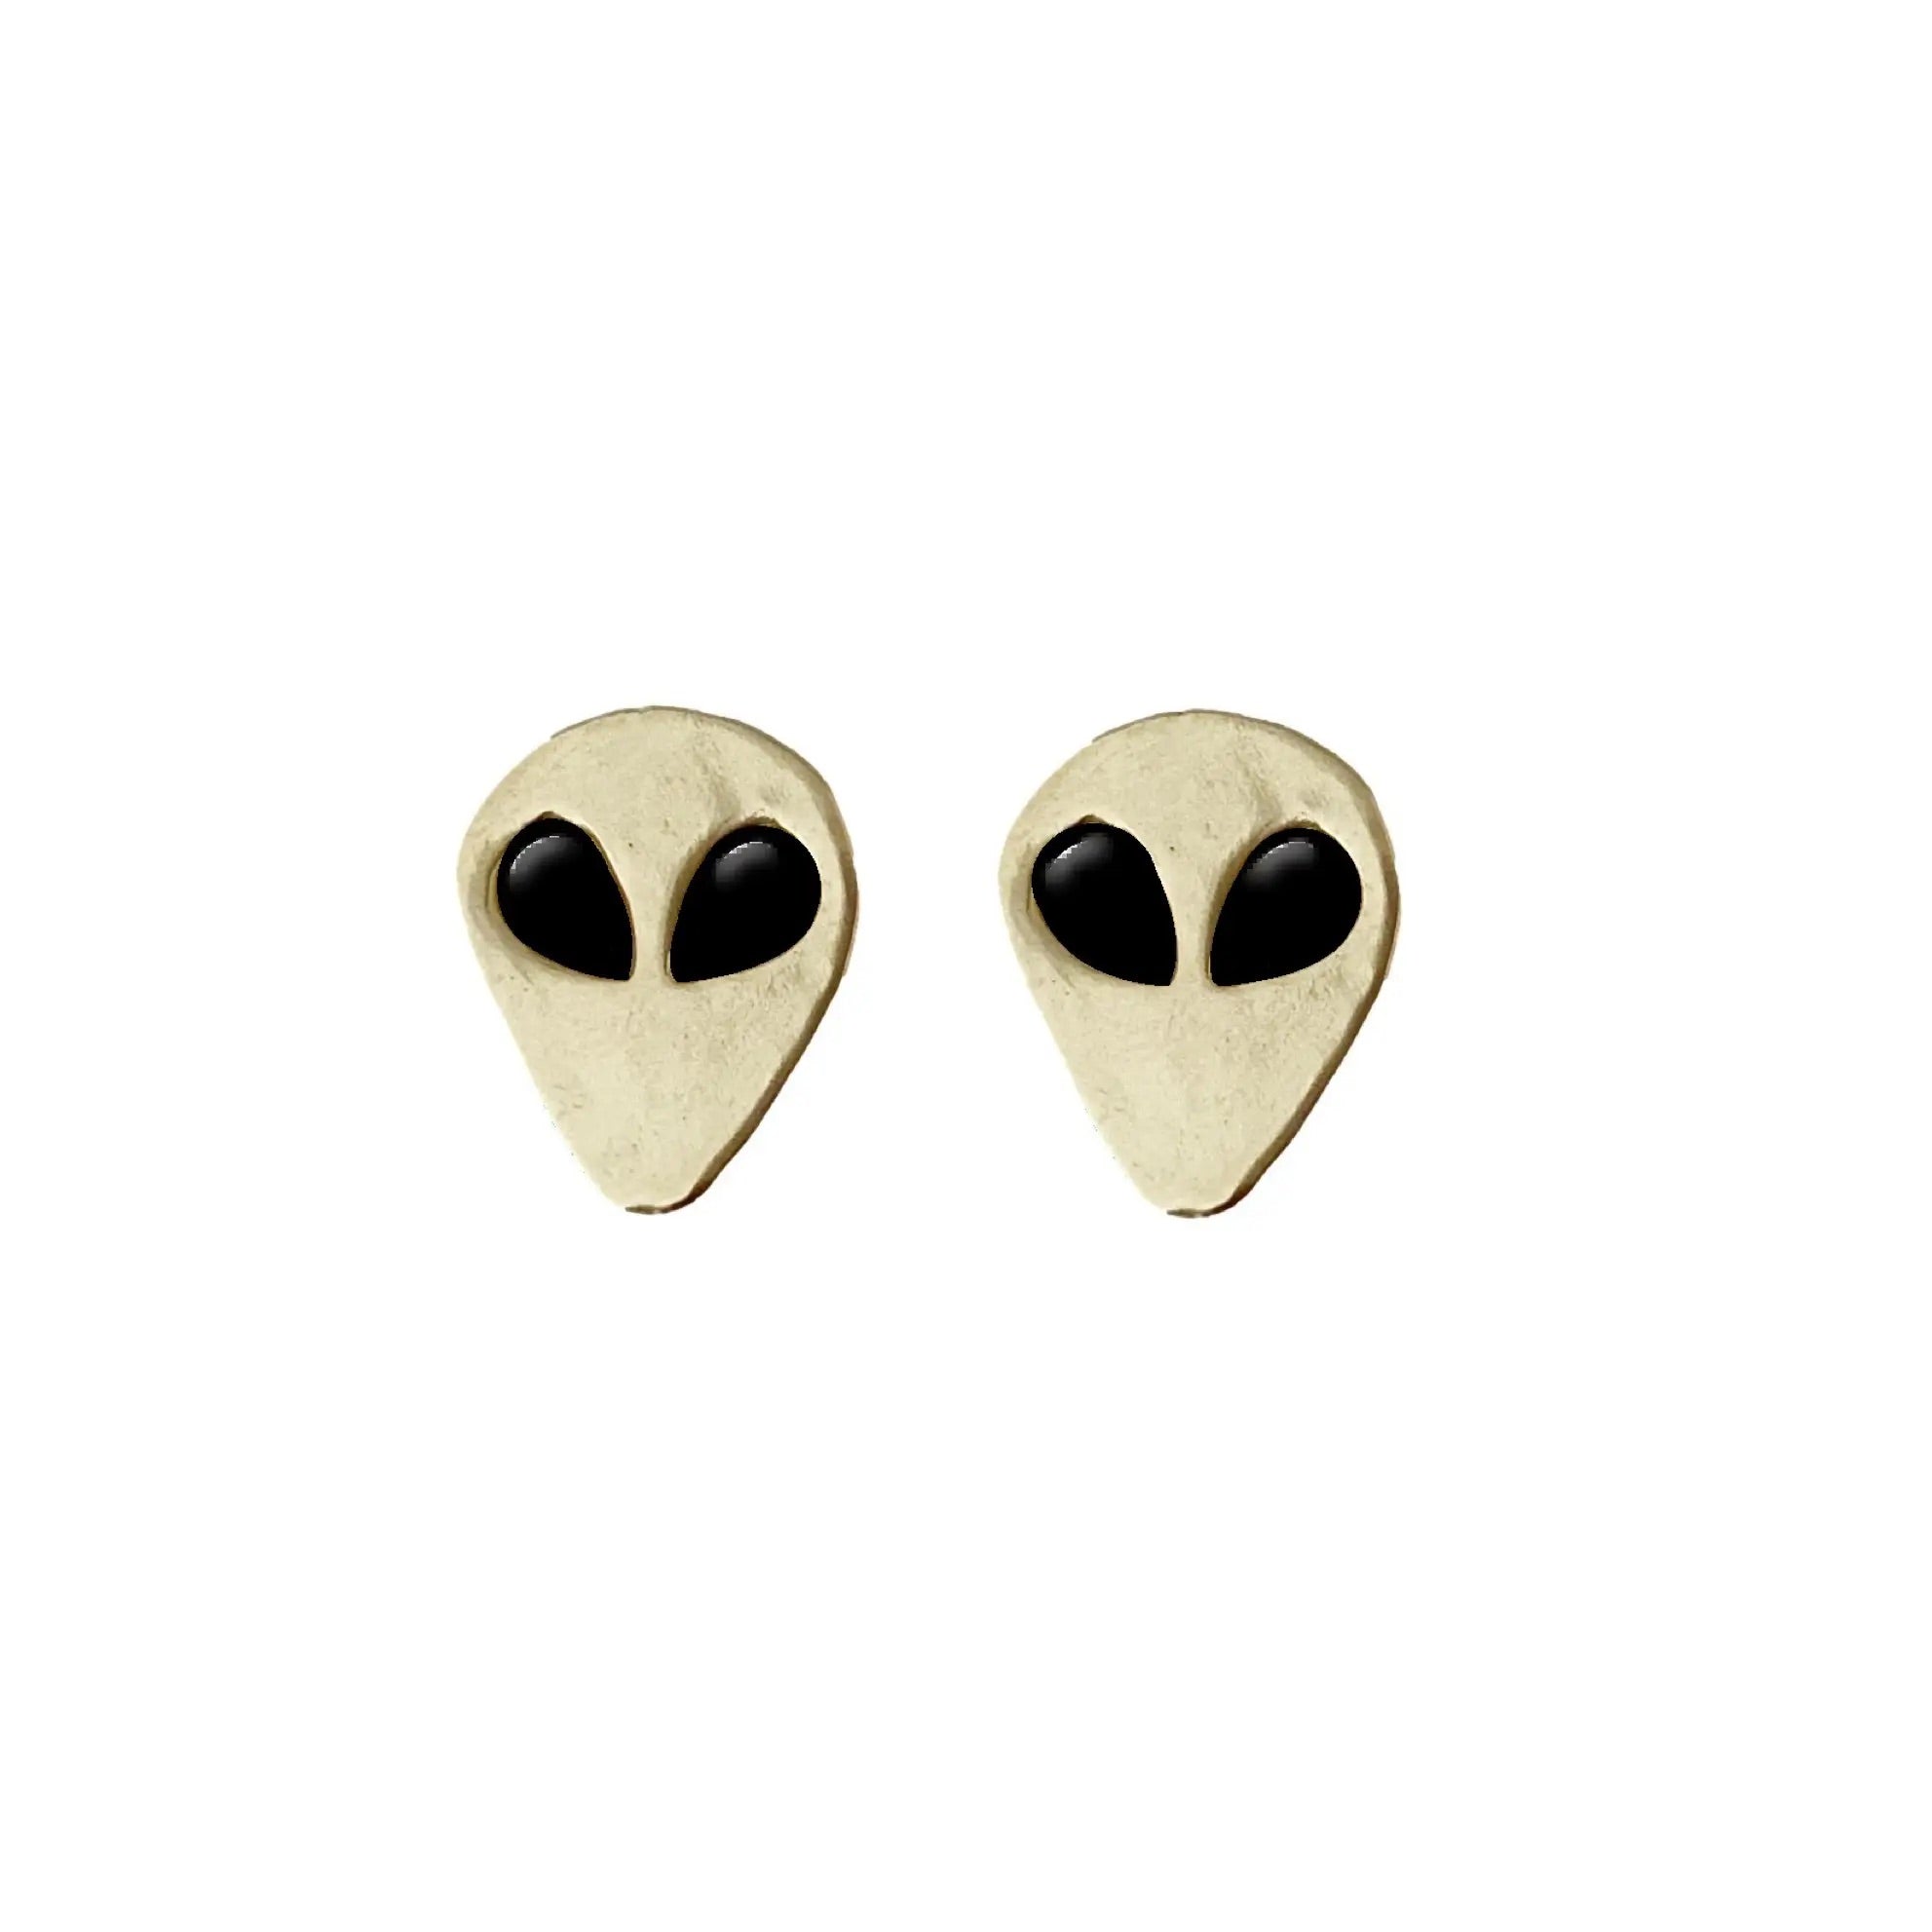 Therese Kuempel Design - Alien Earrings with Black Onyx